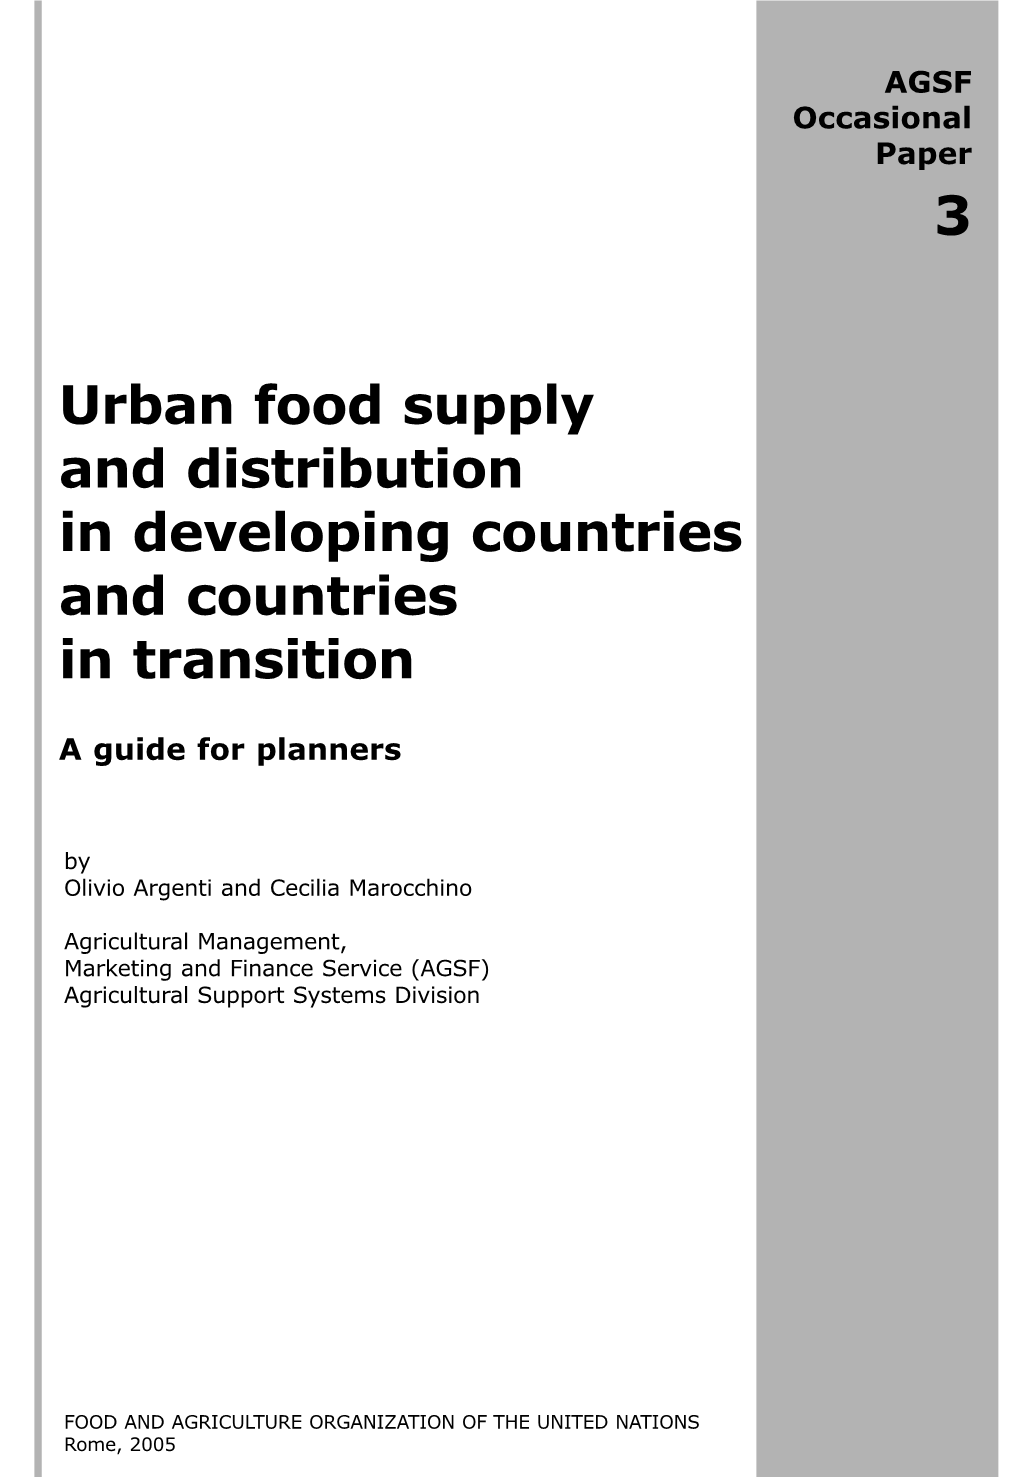 Urban Food Supply and Distribution in Developing Countries and Countries in Transition